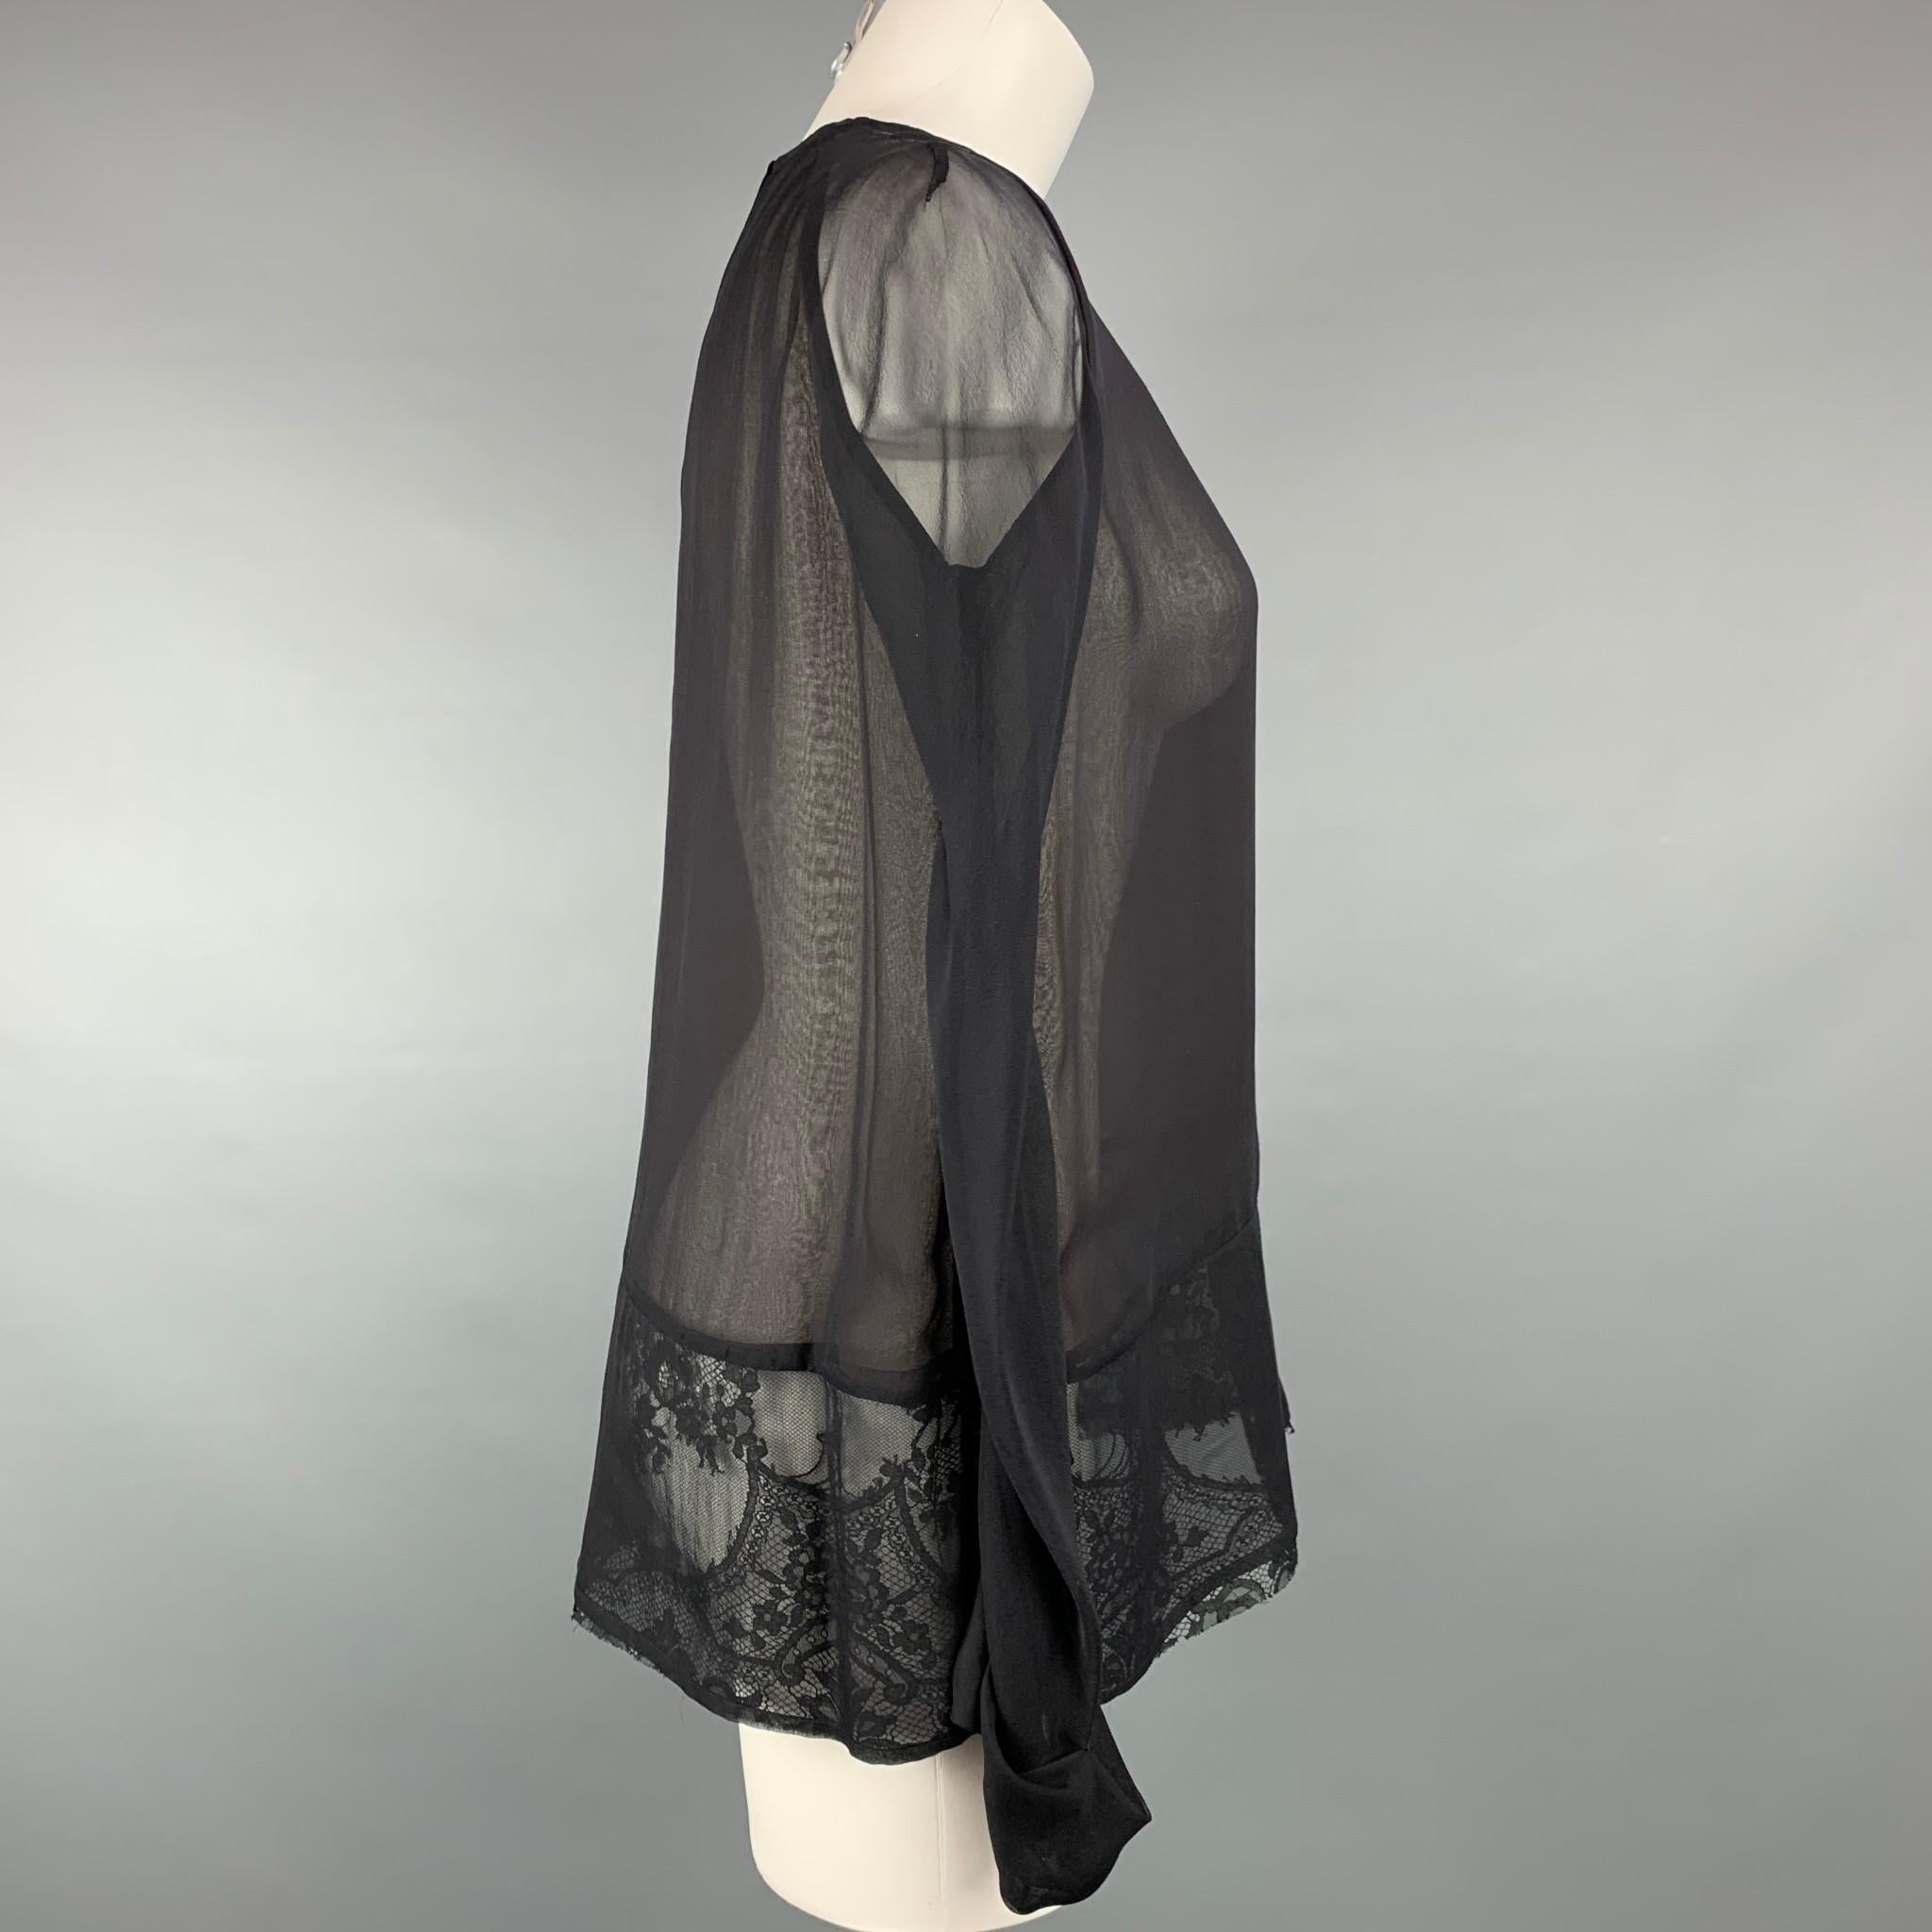 HAIDER ACKERMANN blouse comes in a black & brown silk with a lace panel folded cuffs and a hook & loop closure. Made in Portugal. 

Very Good Pre-Owned Condition.
Marked: 40
Original Retail Price: $1,765.00

Measurements:

Shoulder: 17 in.
Bust: 40